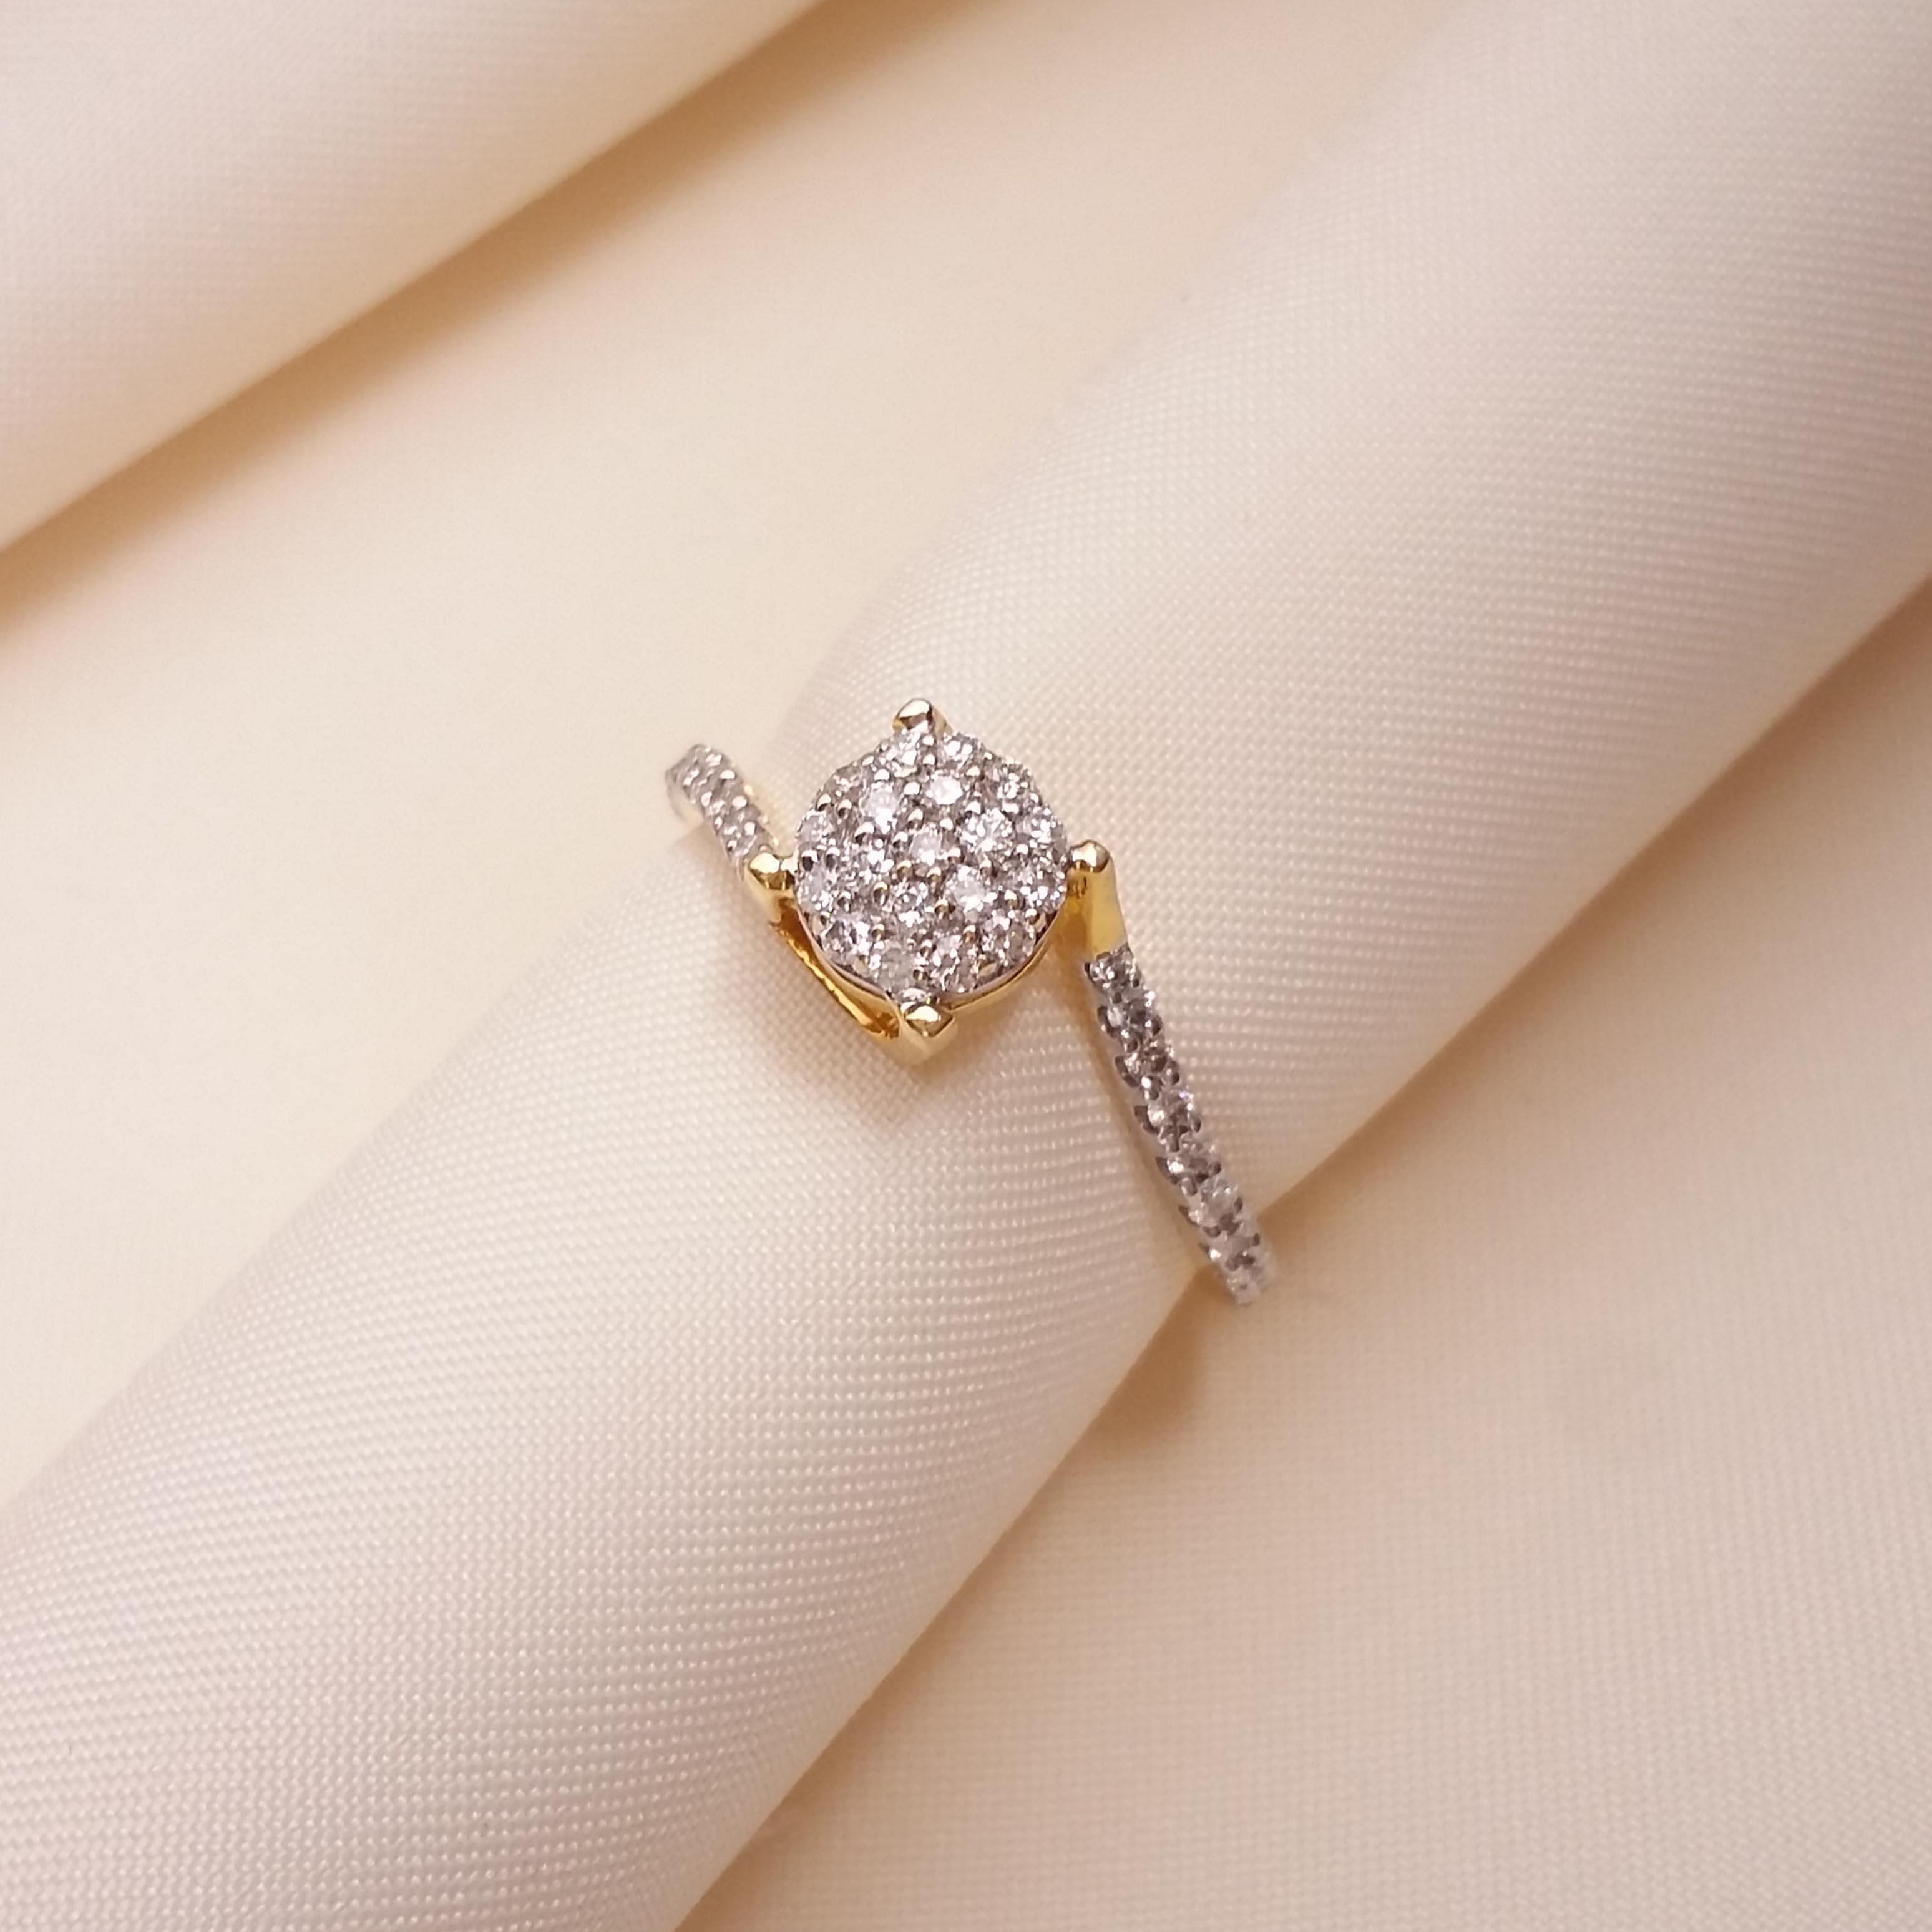 Evelina - 14k Yellow & white Gold 1.5 Carat Round Solitaire Engagement Ring  @ $750 | Gabriel & Co.